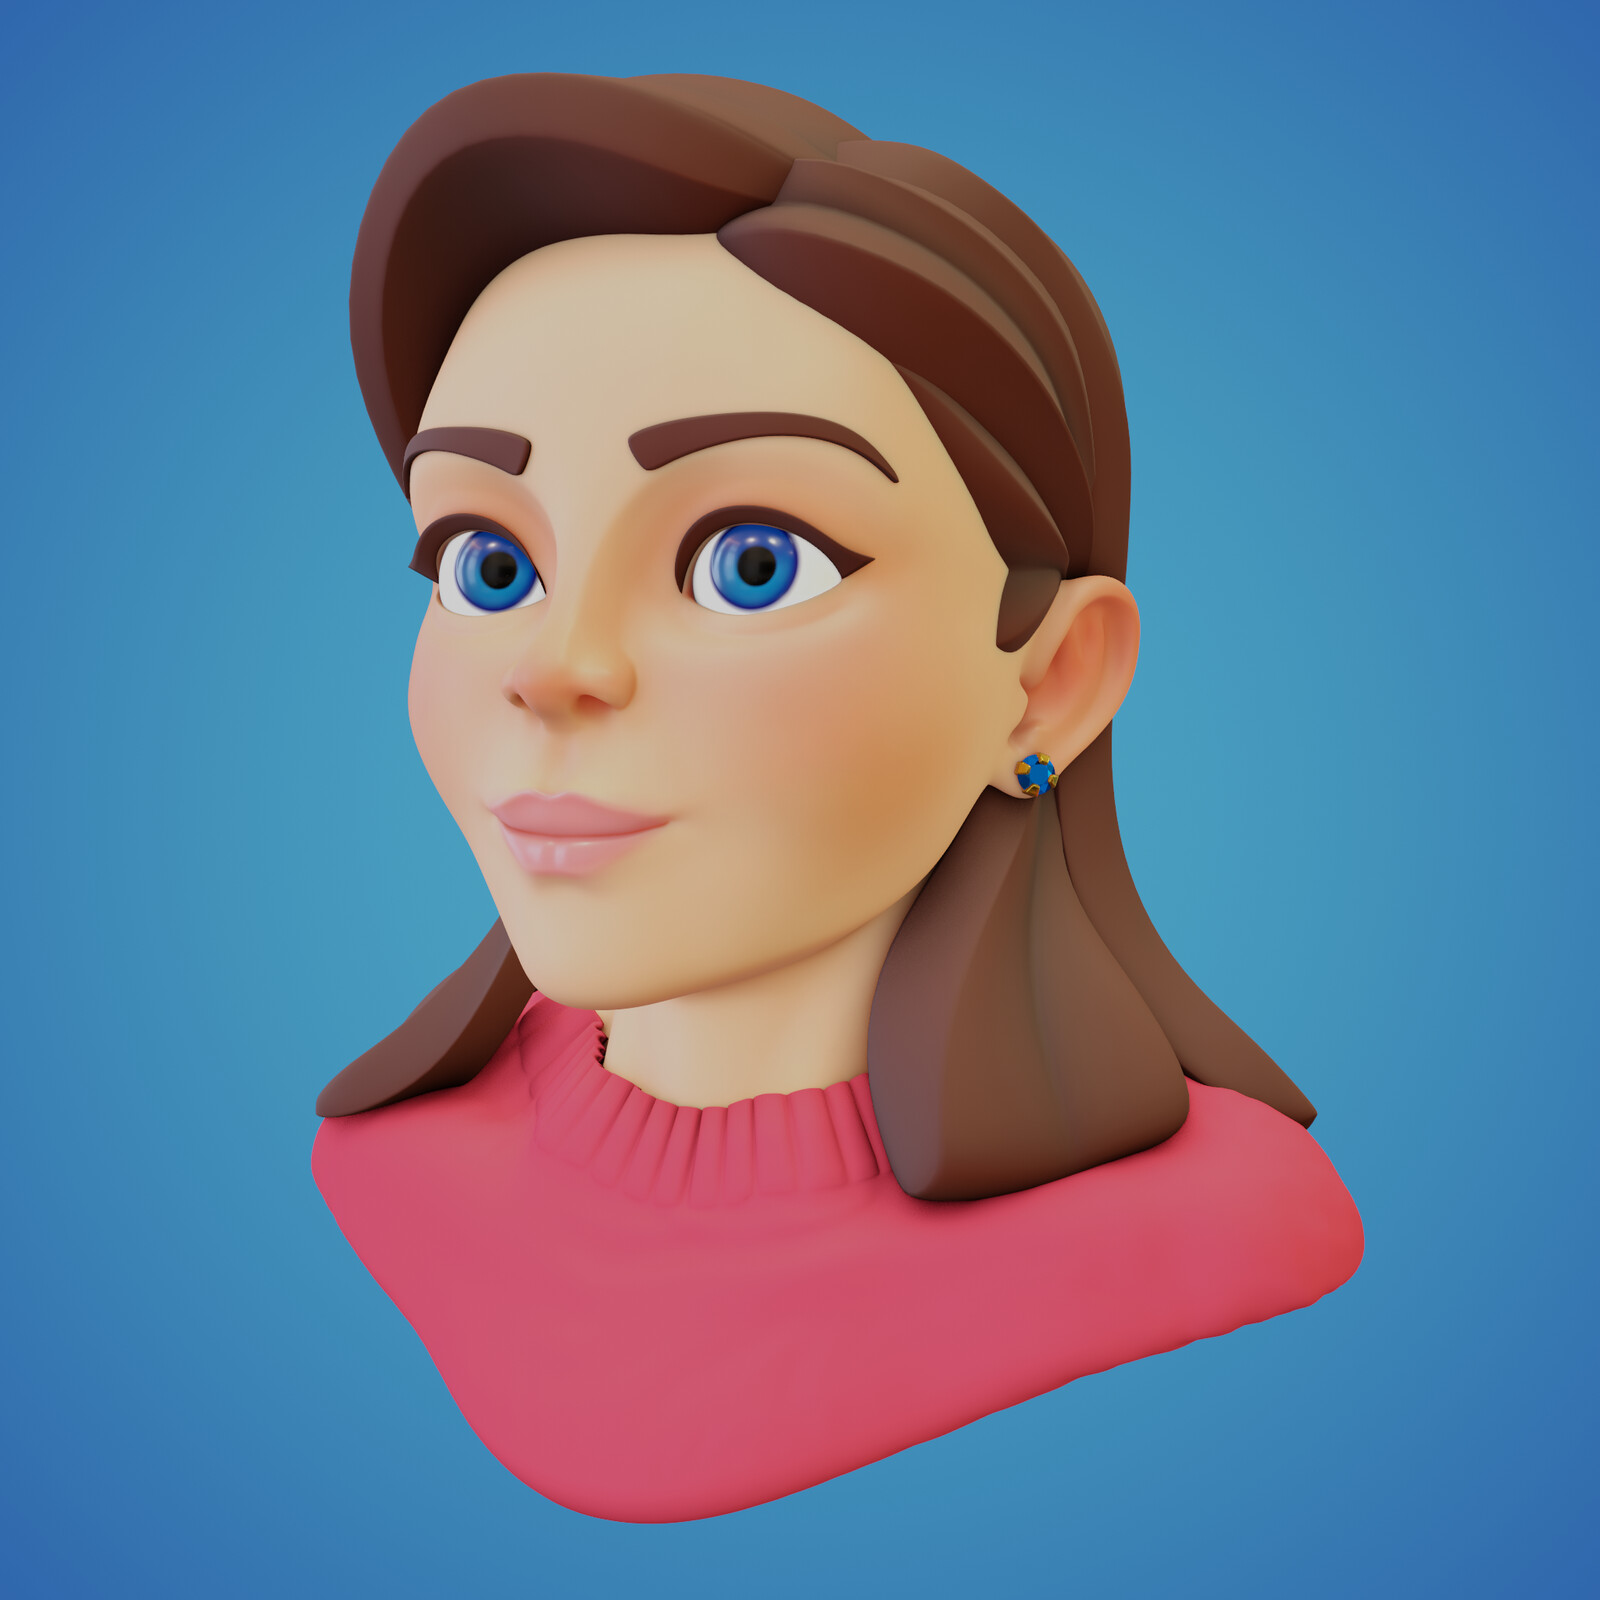 Stylized Lady Rendered in Eevee